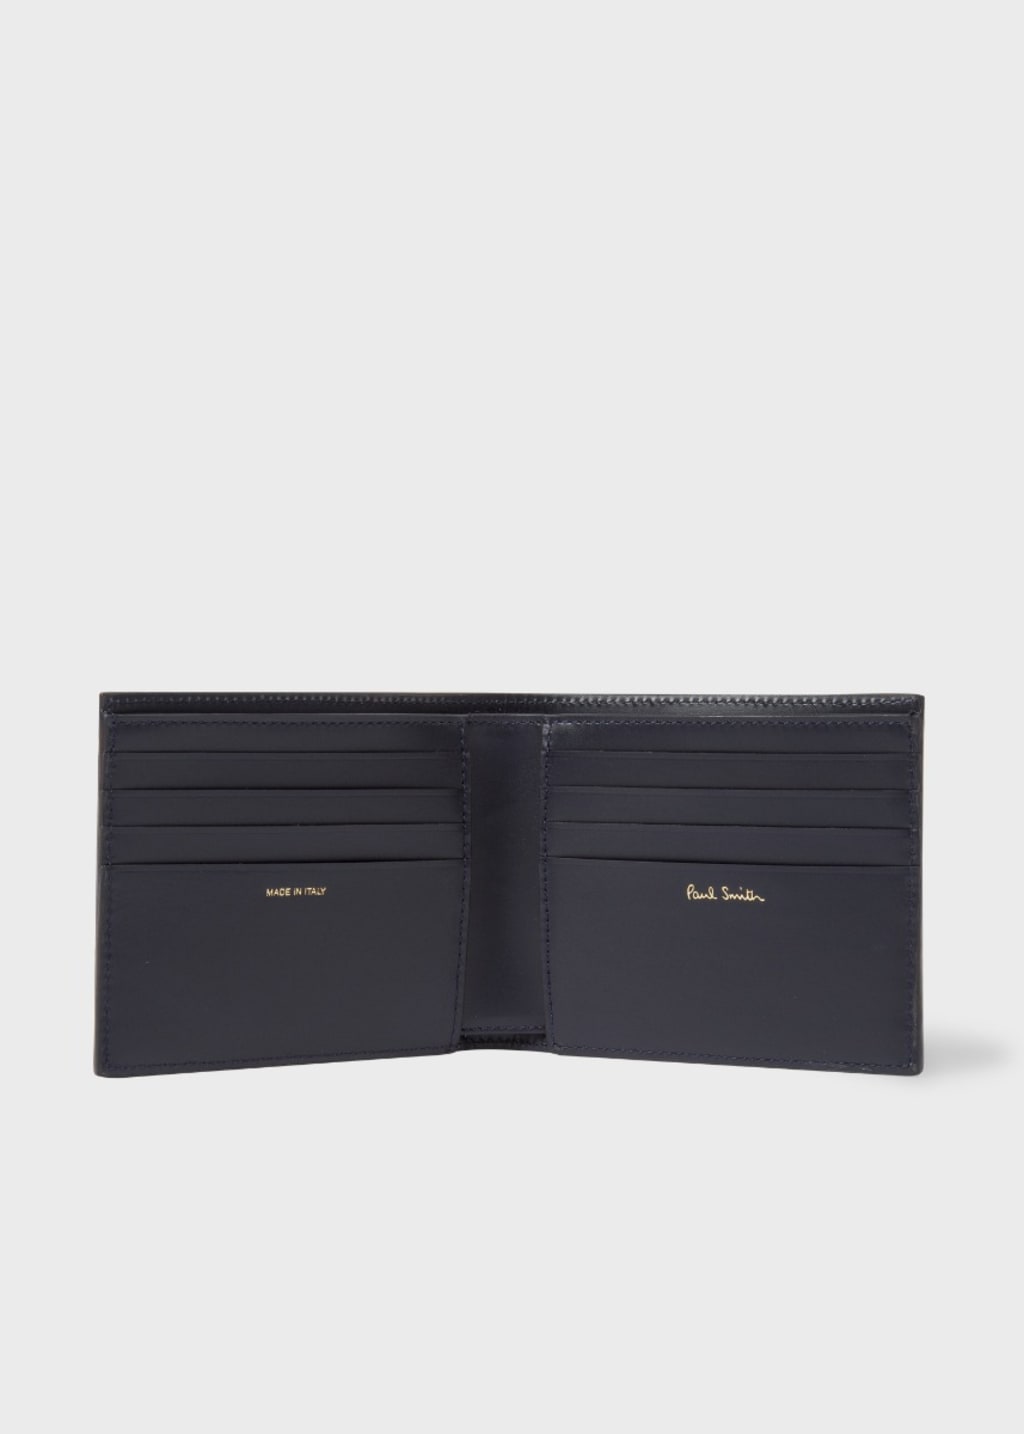 Detail View - Navy Leather Monogrammed Billfold Wallet Paul Smith